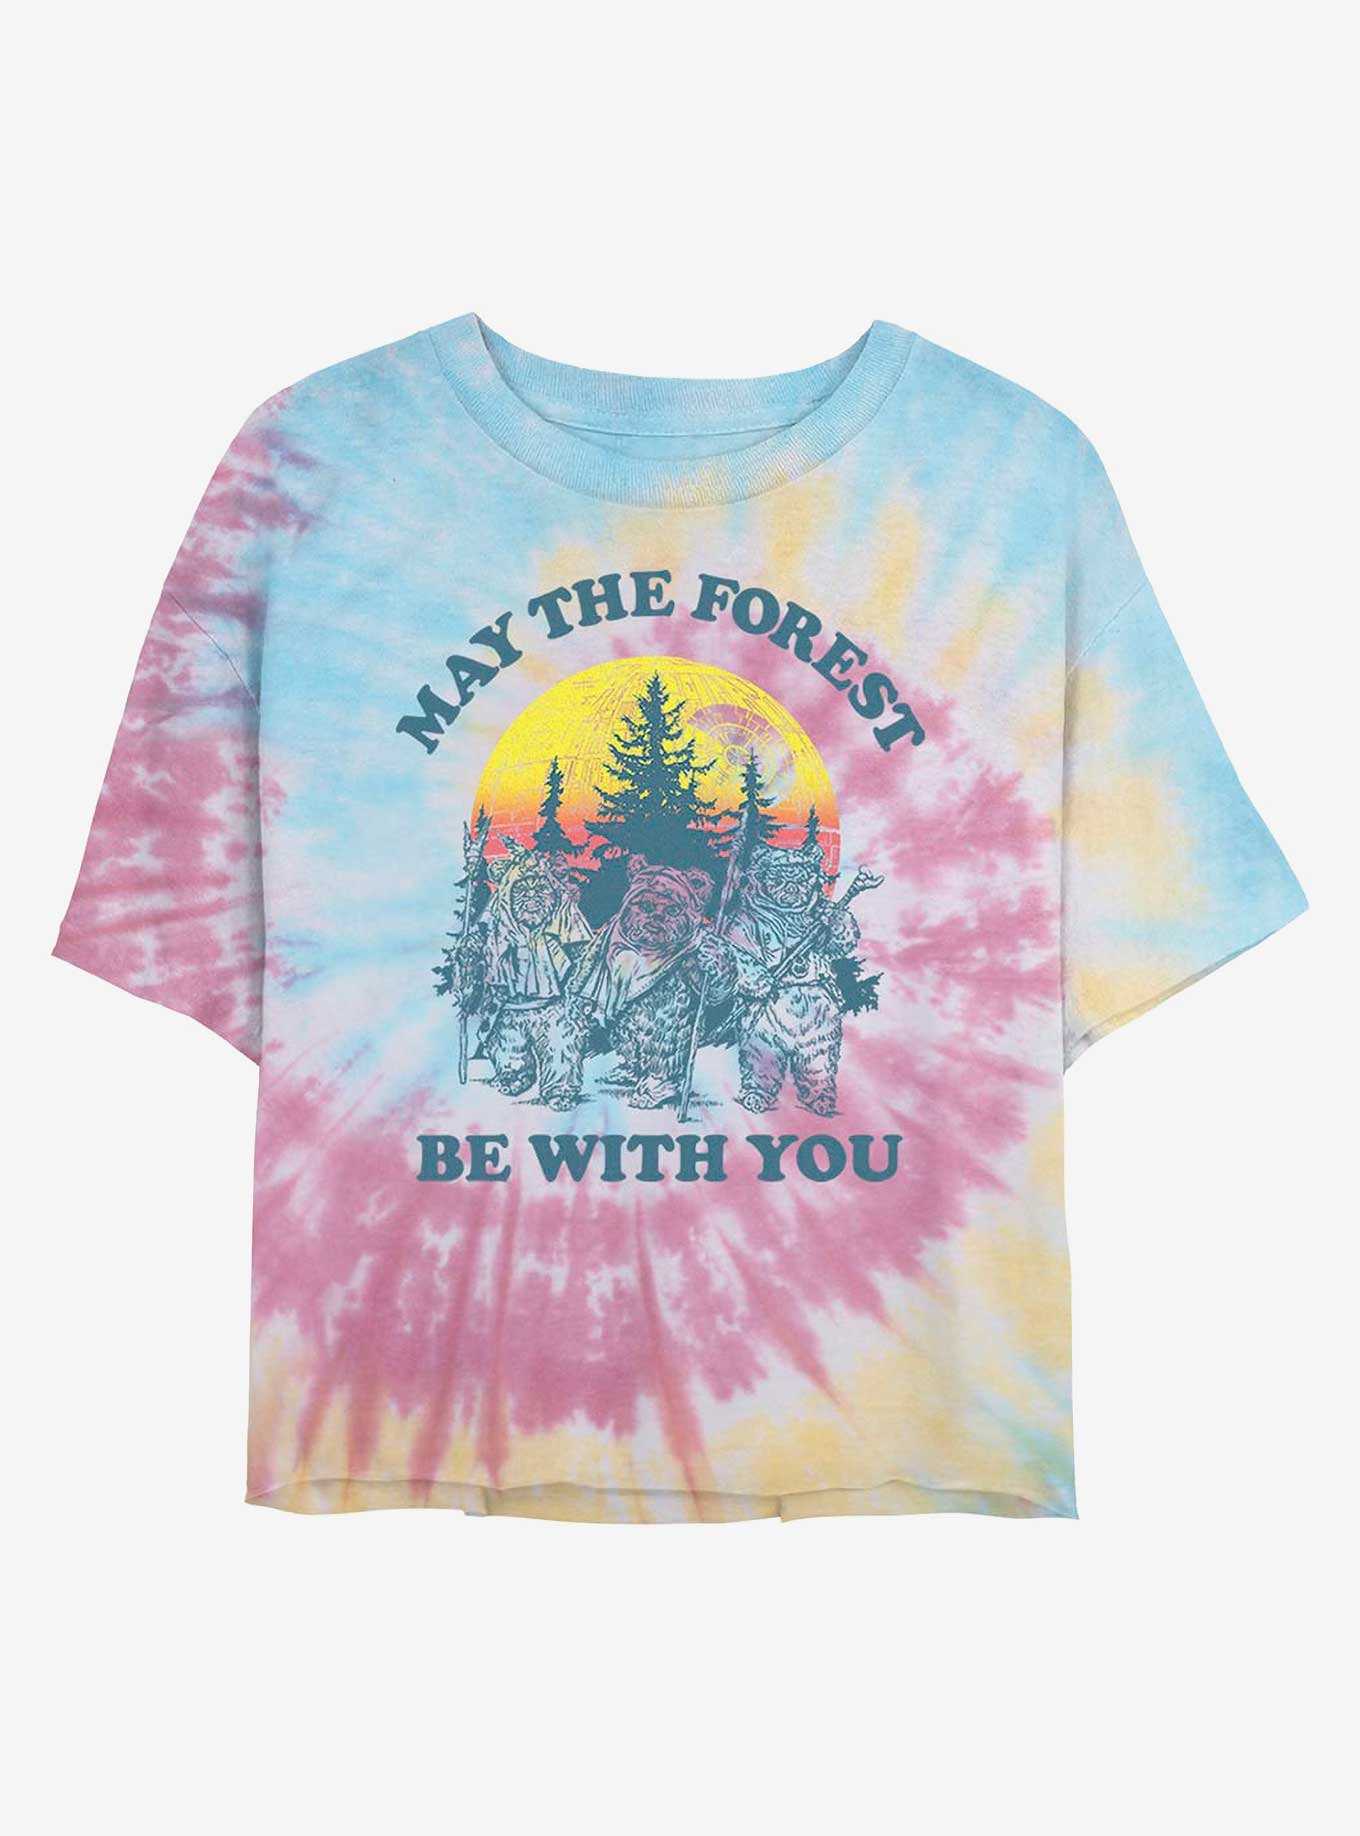 Star Wars Ewok Forest Be With You Tie Dye Crop Girls T-Shirt, , hi-res